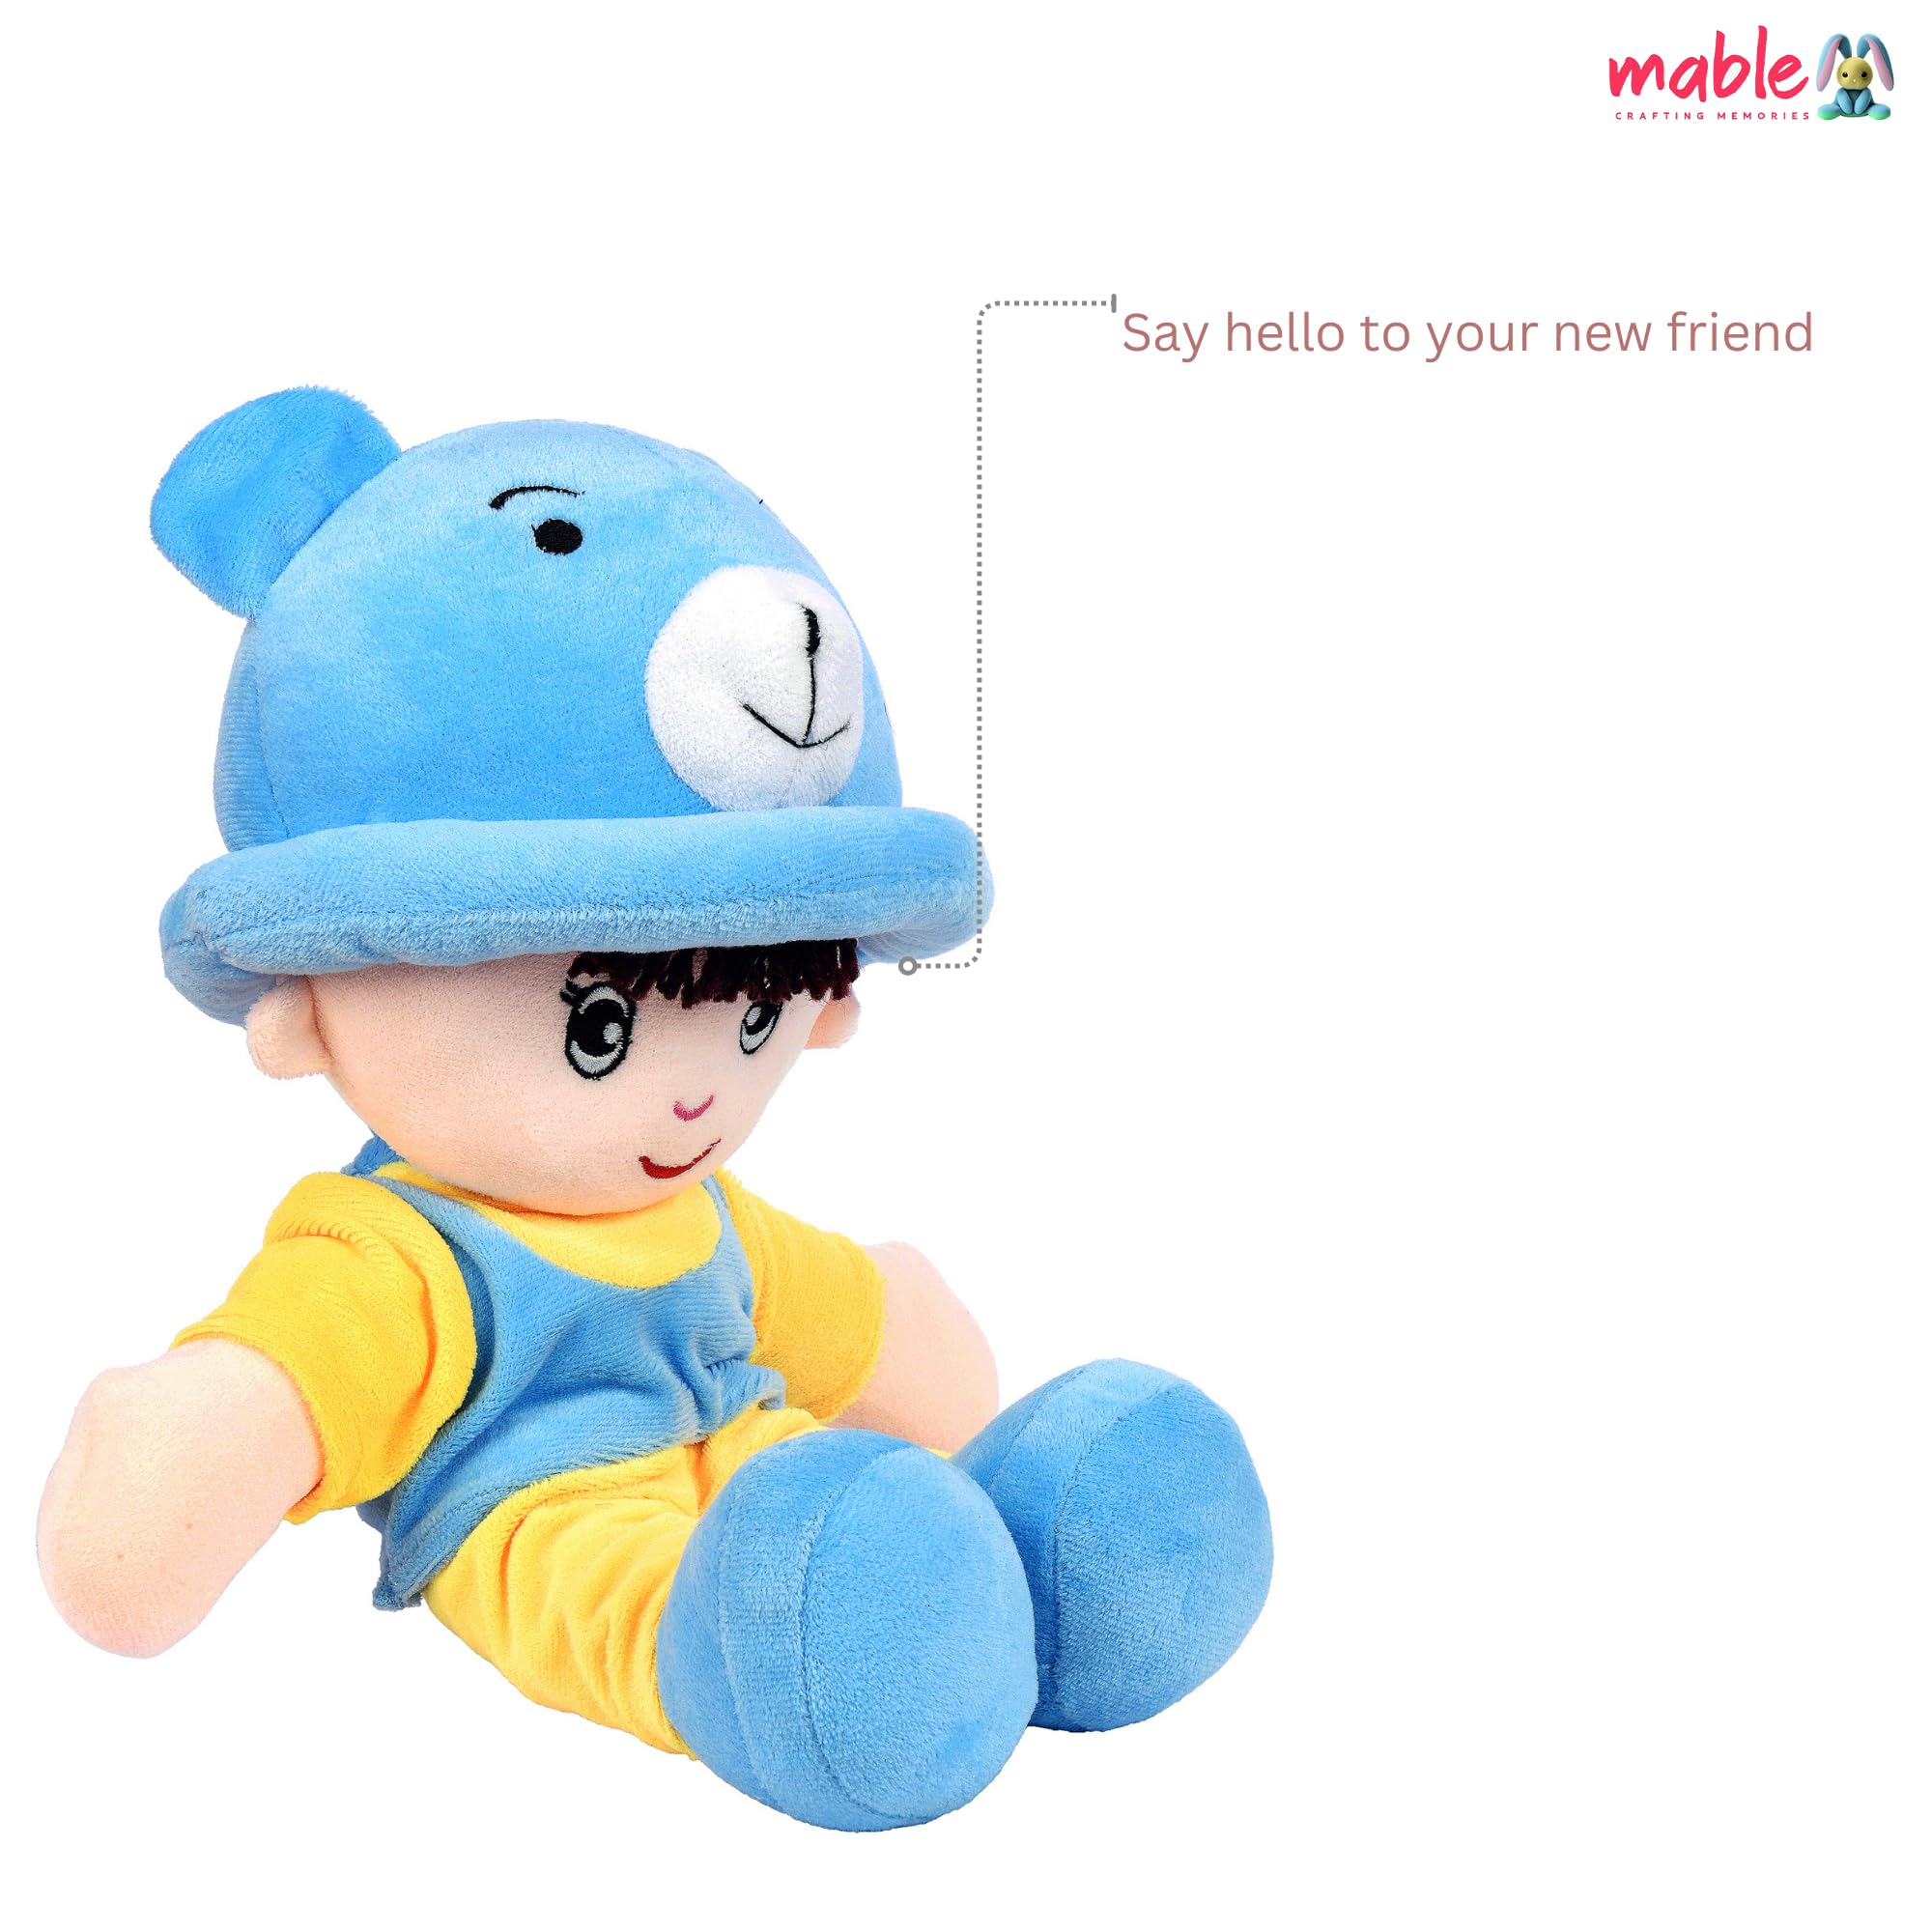 Addie Boy Rag Doll for Kids Huggable & Adorable Plush for Toddlers | Baby Doll with Hat for Boys and Girls | Soft and Cuddly Stuffed Toy for Babies | Made in India (Blue, 35cm)